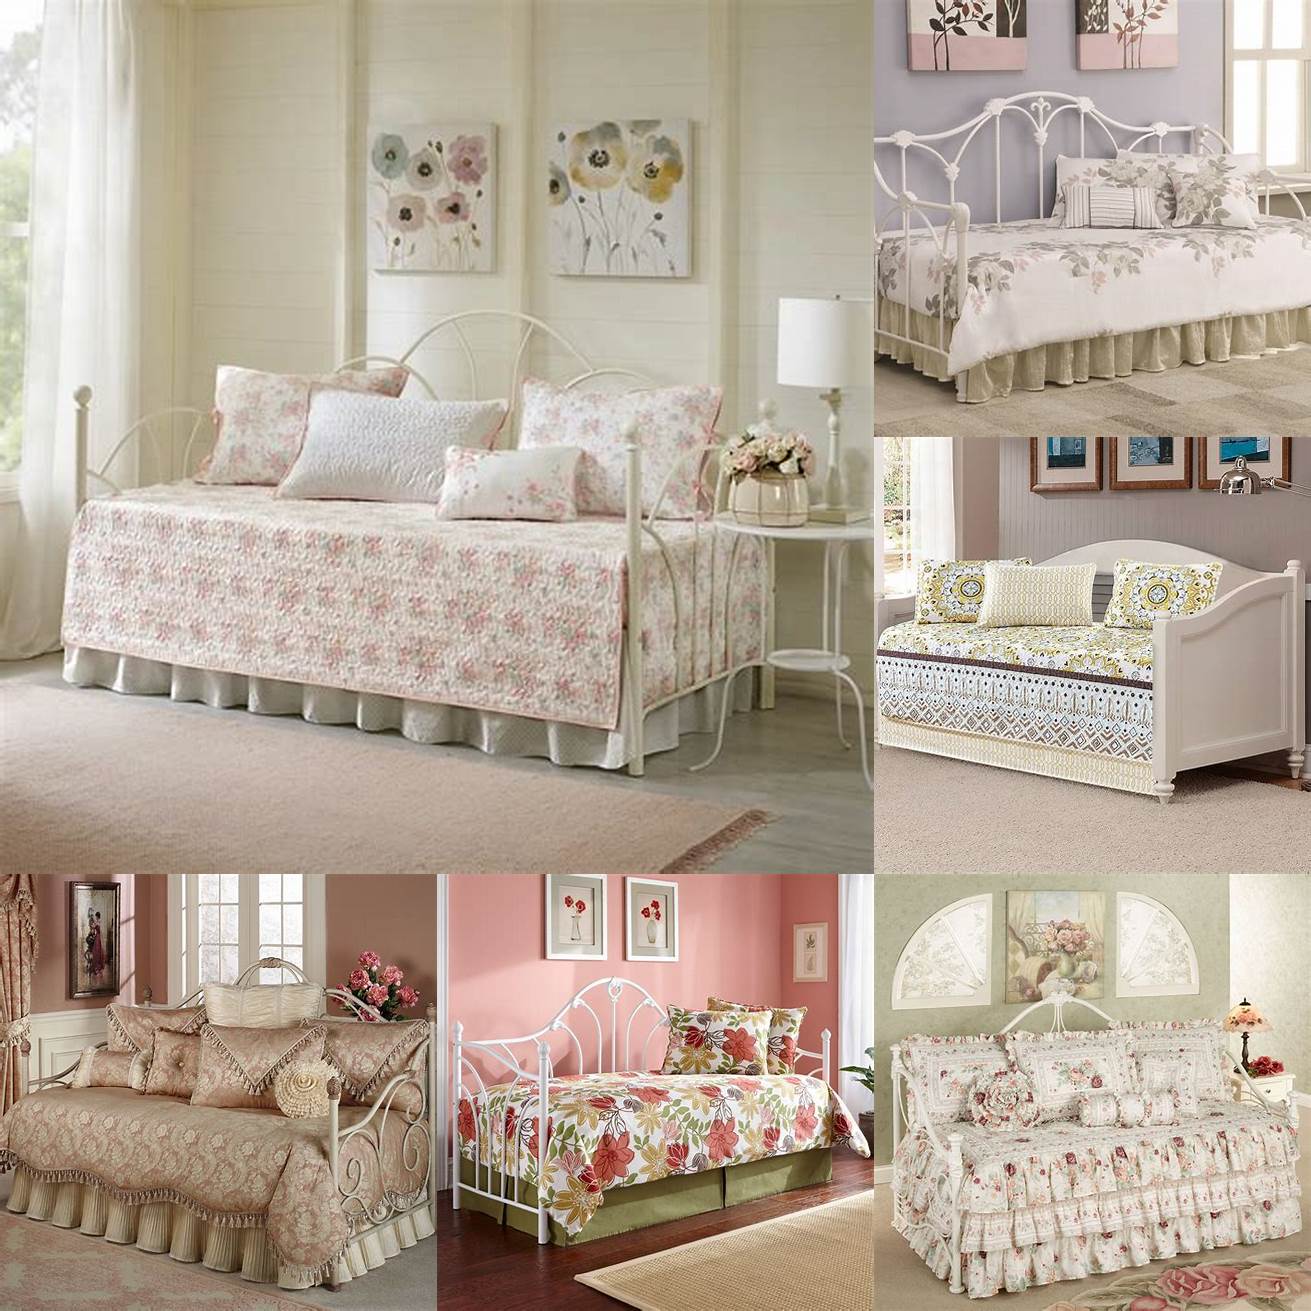 Daybed with floral pillows